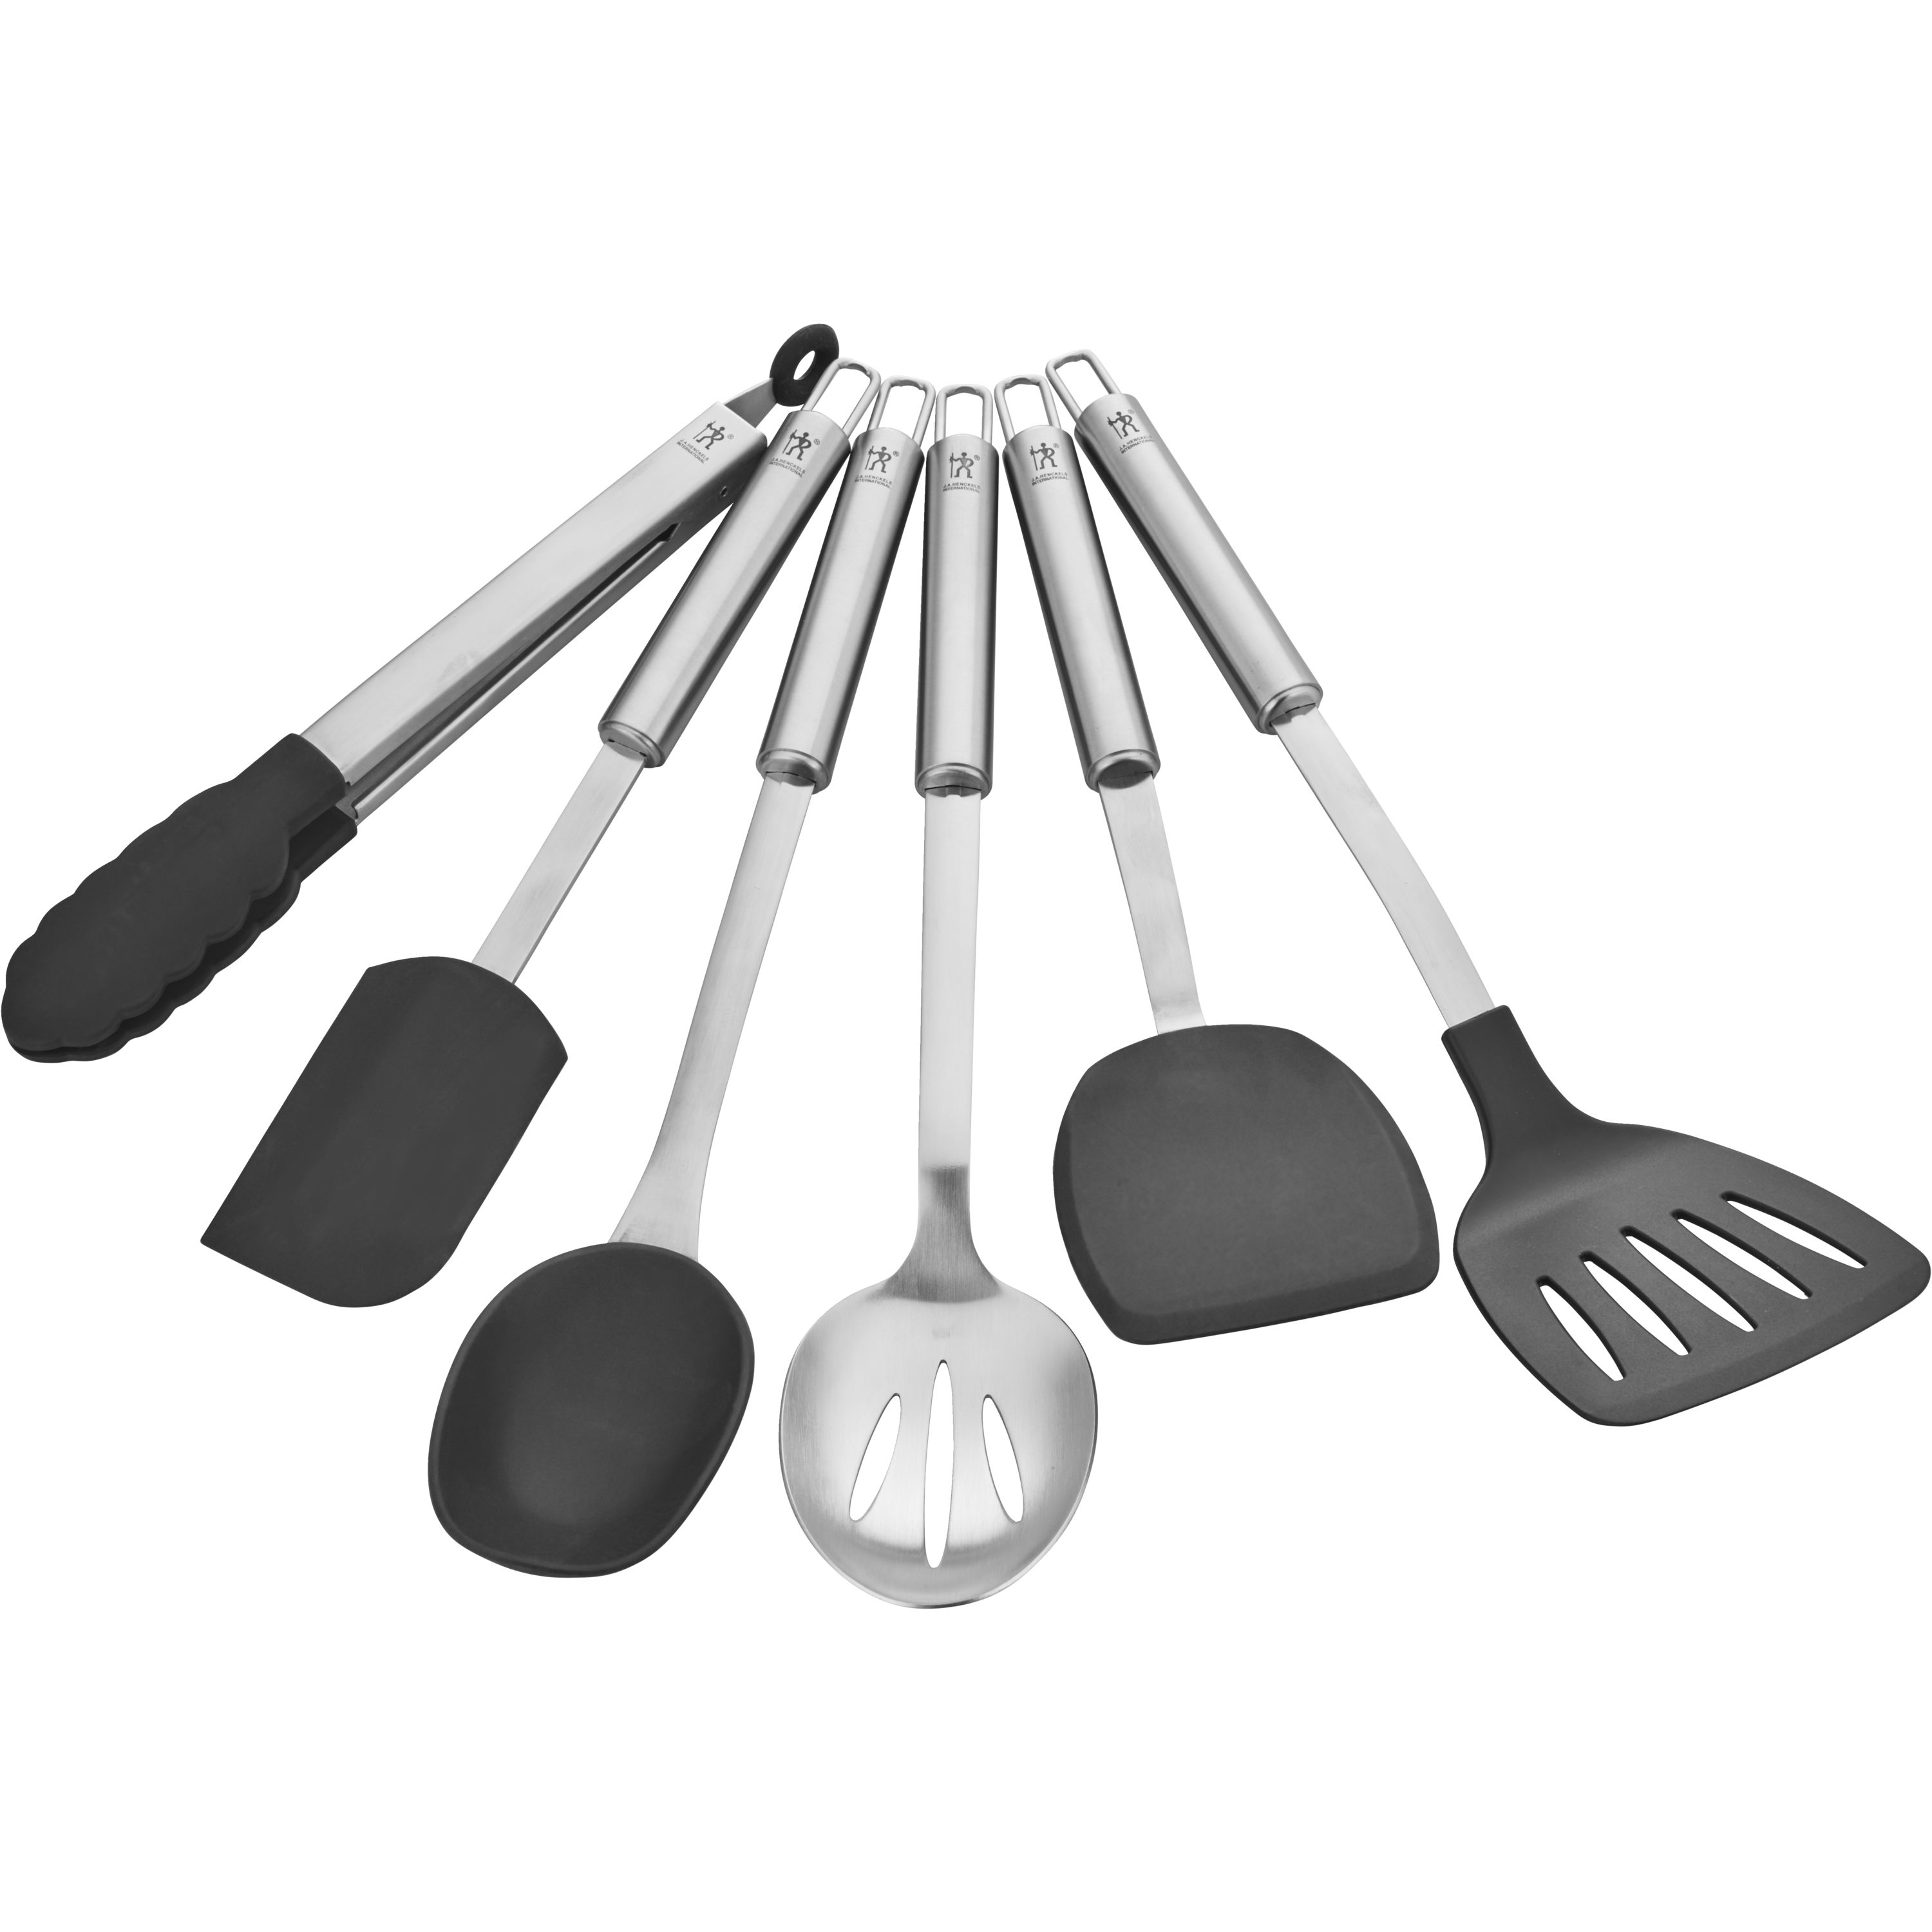 All-Clad Professional Stainless Steel Kitchen Tool Set, 6-Piece, Silver